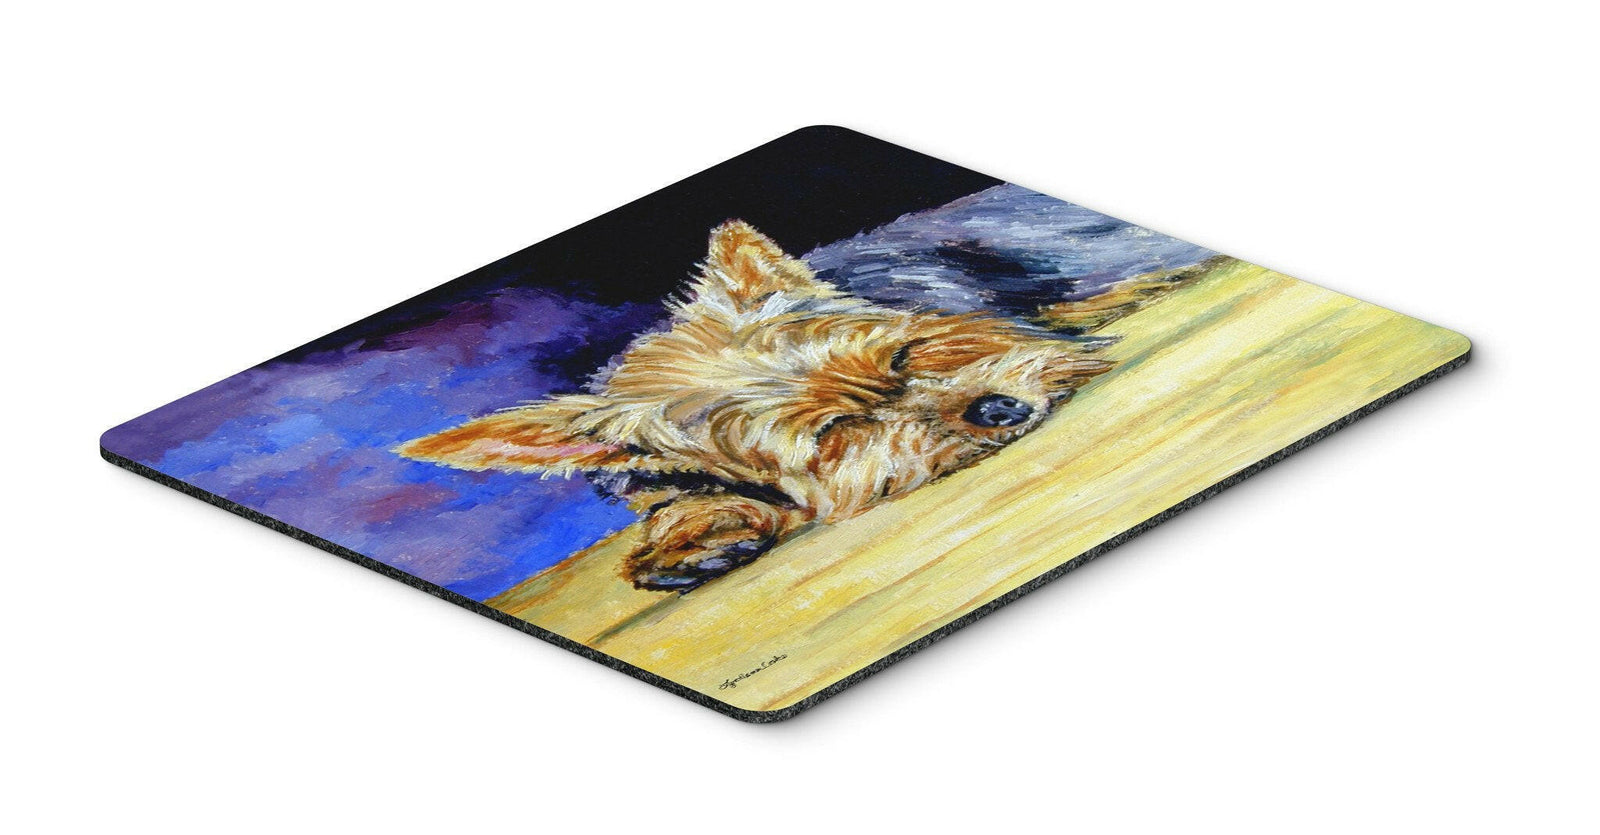 Yorkie Taking a Nap Mouse Pad, Hot Pad or Trivet 7357MP by Caroline's Treasures